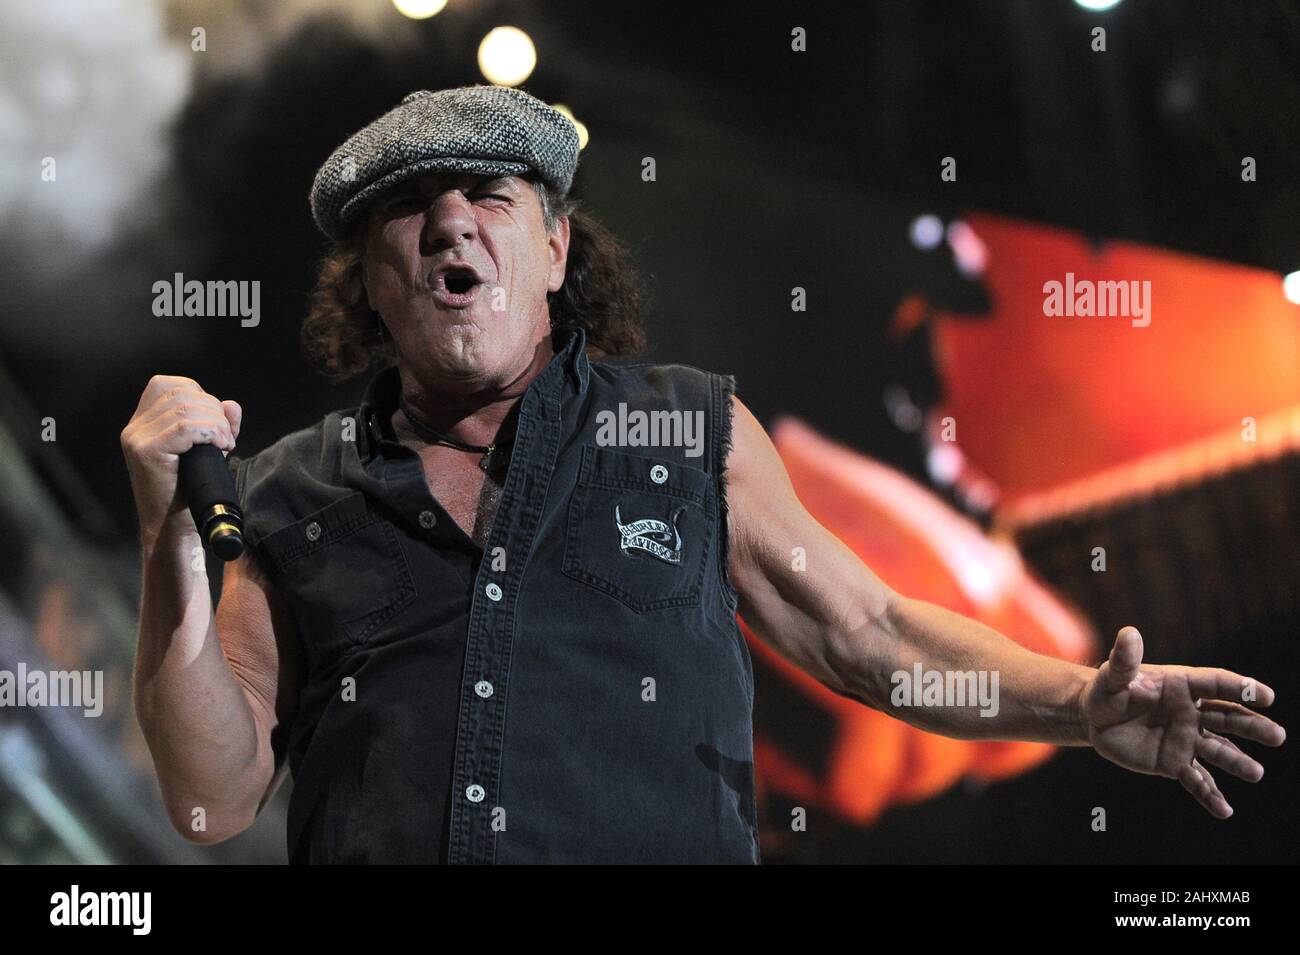 Udine Italy 05/19/2010 : Live concert of ACDC at the Stadio Friuli,Brian Johnson during the concert Stock Photo